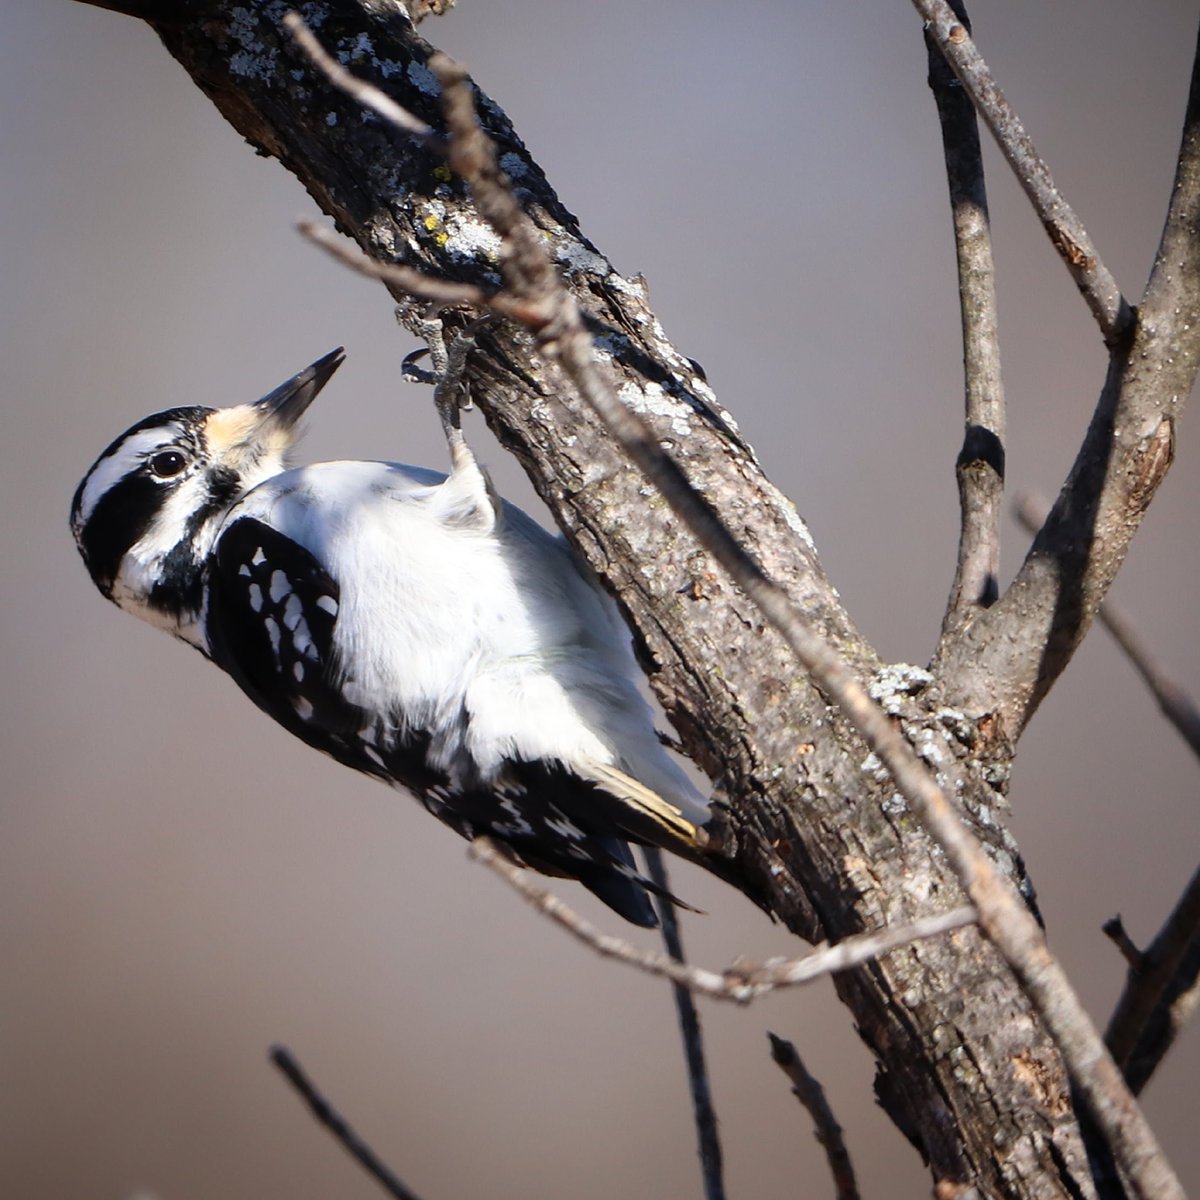 Came across this lovely female hairy woodpecker while on the Yellow Trail at Possum Creek MetroPark yesterday...
#possumcreek #metropark #possumcreekmetropark #metroparks #hairywoodpecker #hairywoodpeckers #femalehairywoodpecker #femalehairywoodpeckers #metroparkstrailschallenge